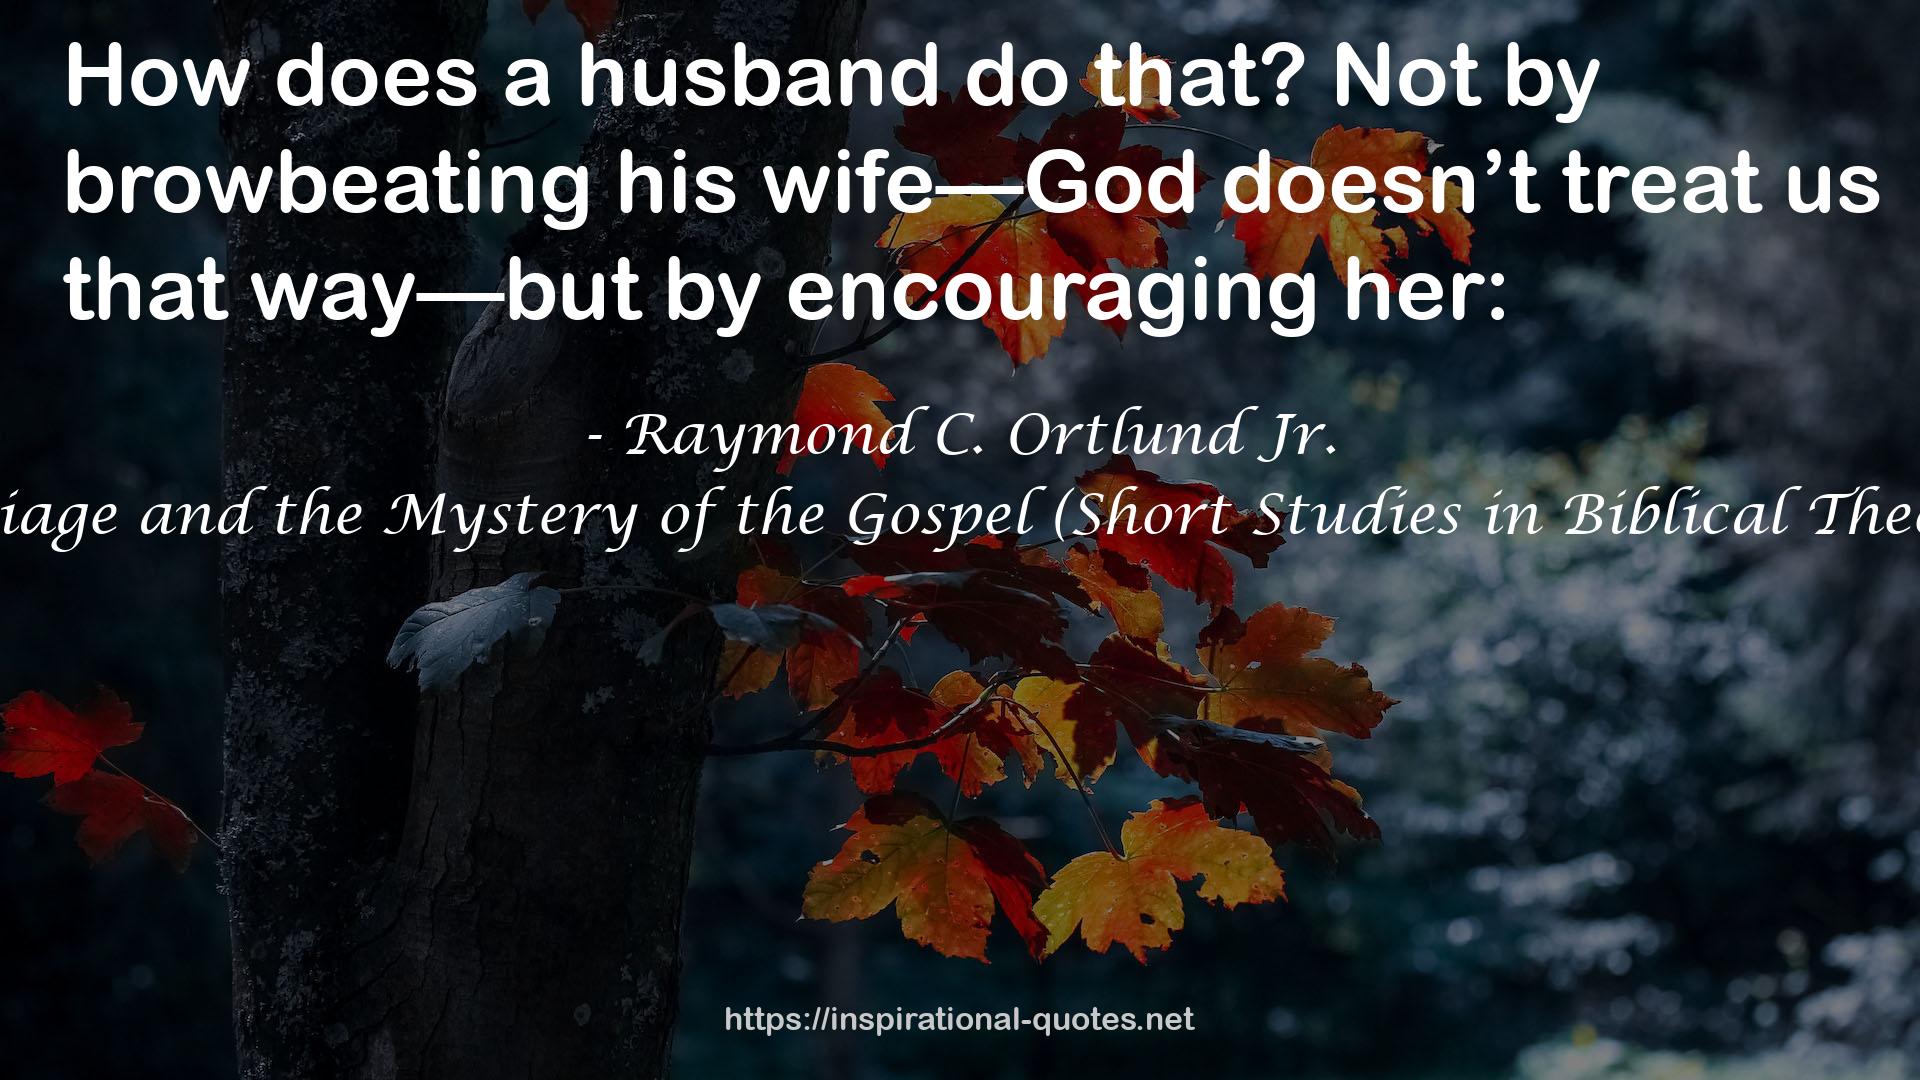 Marriage and the Mystery of the Gospel (Short Studies in Biblical Theology) QUOTES